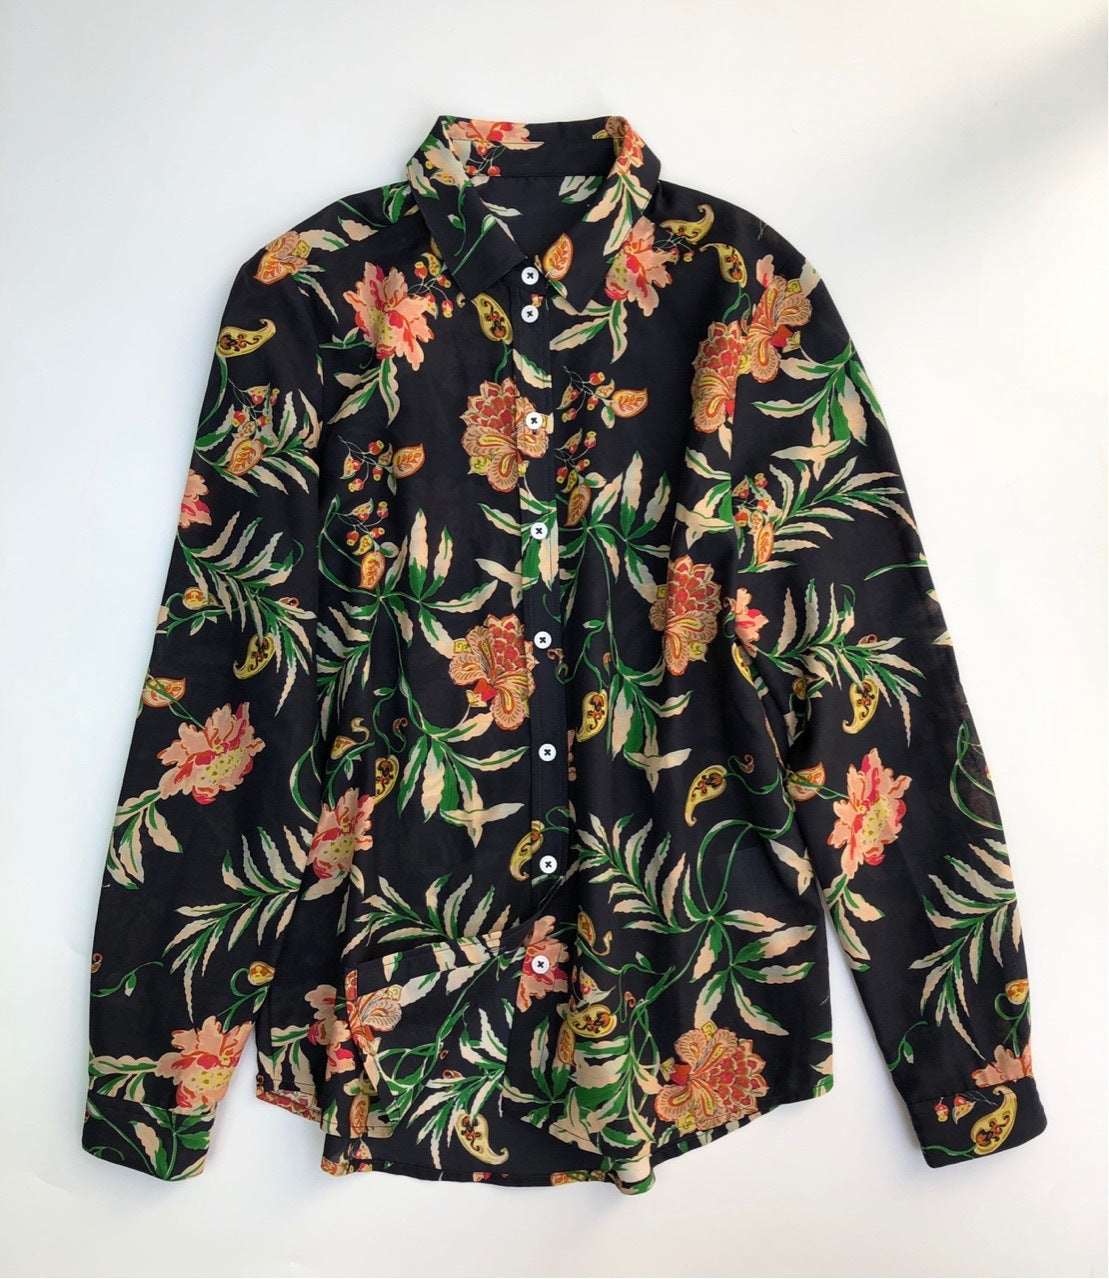 Blooming paradise: Tropical flowers and leaves create a stunning print on this Hawaiian shirt.